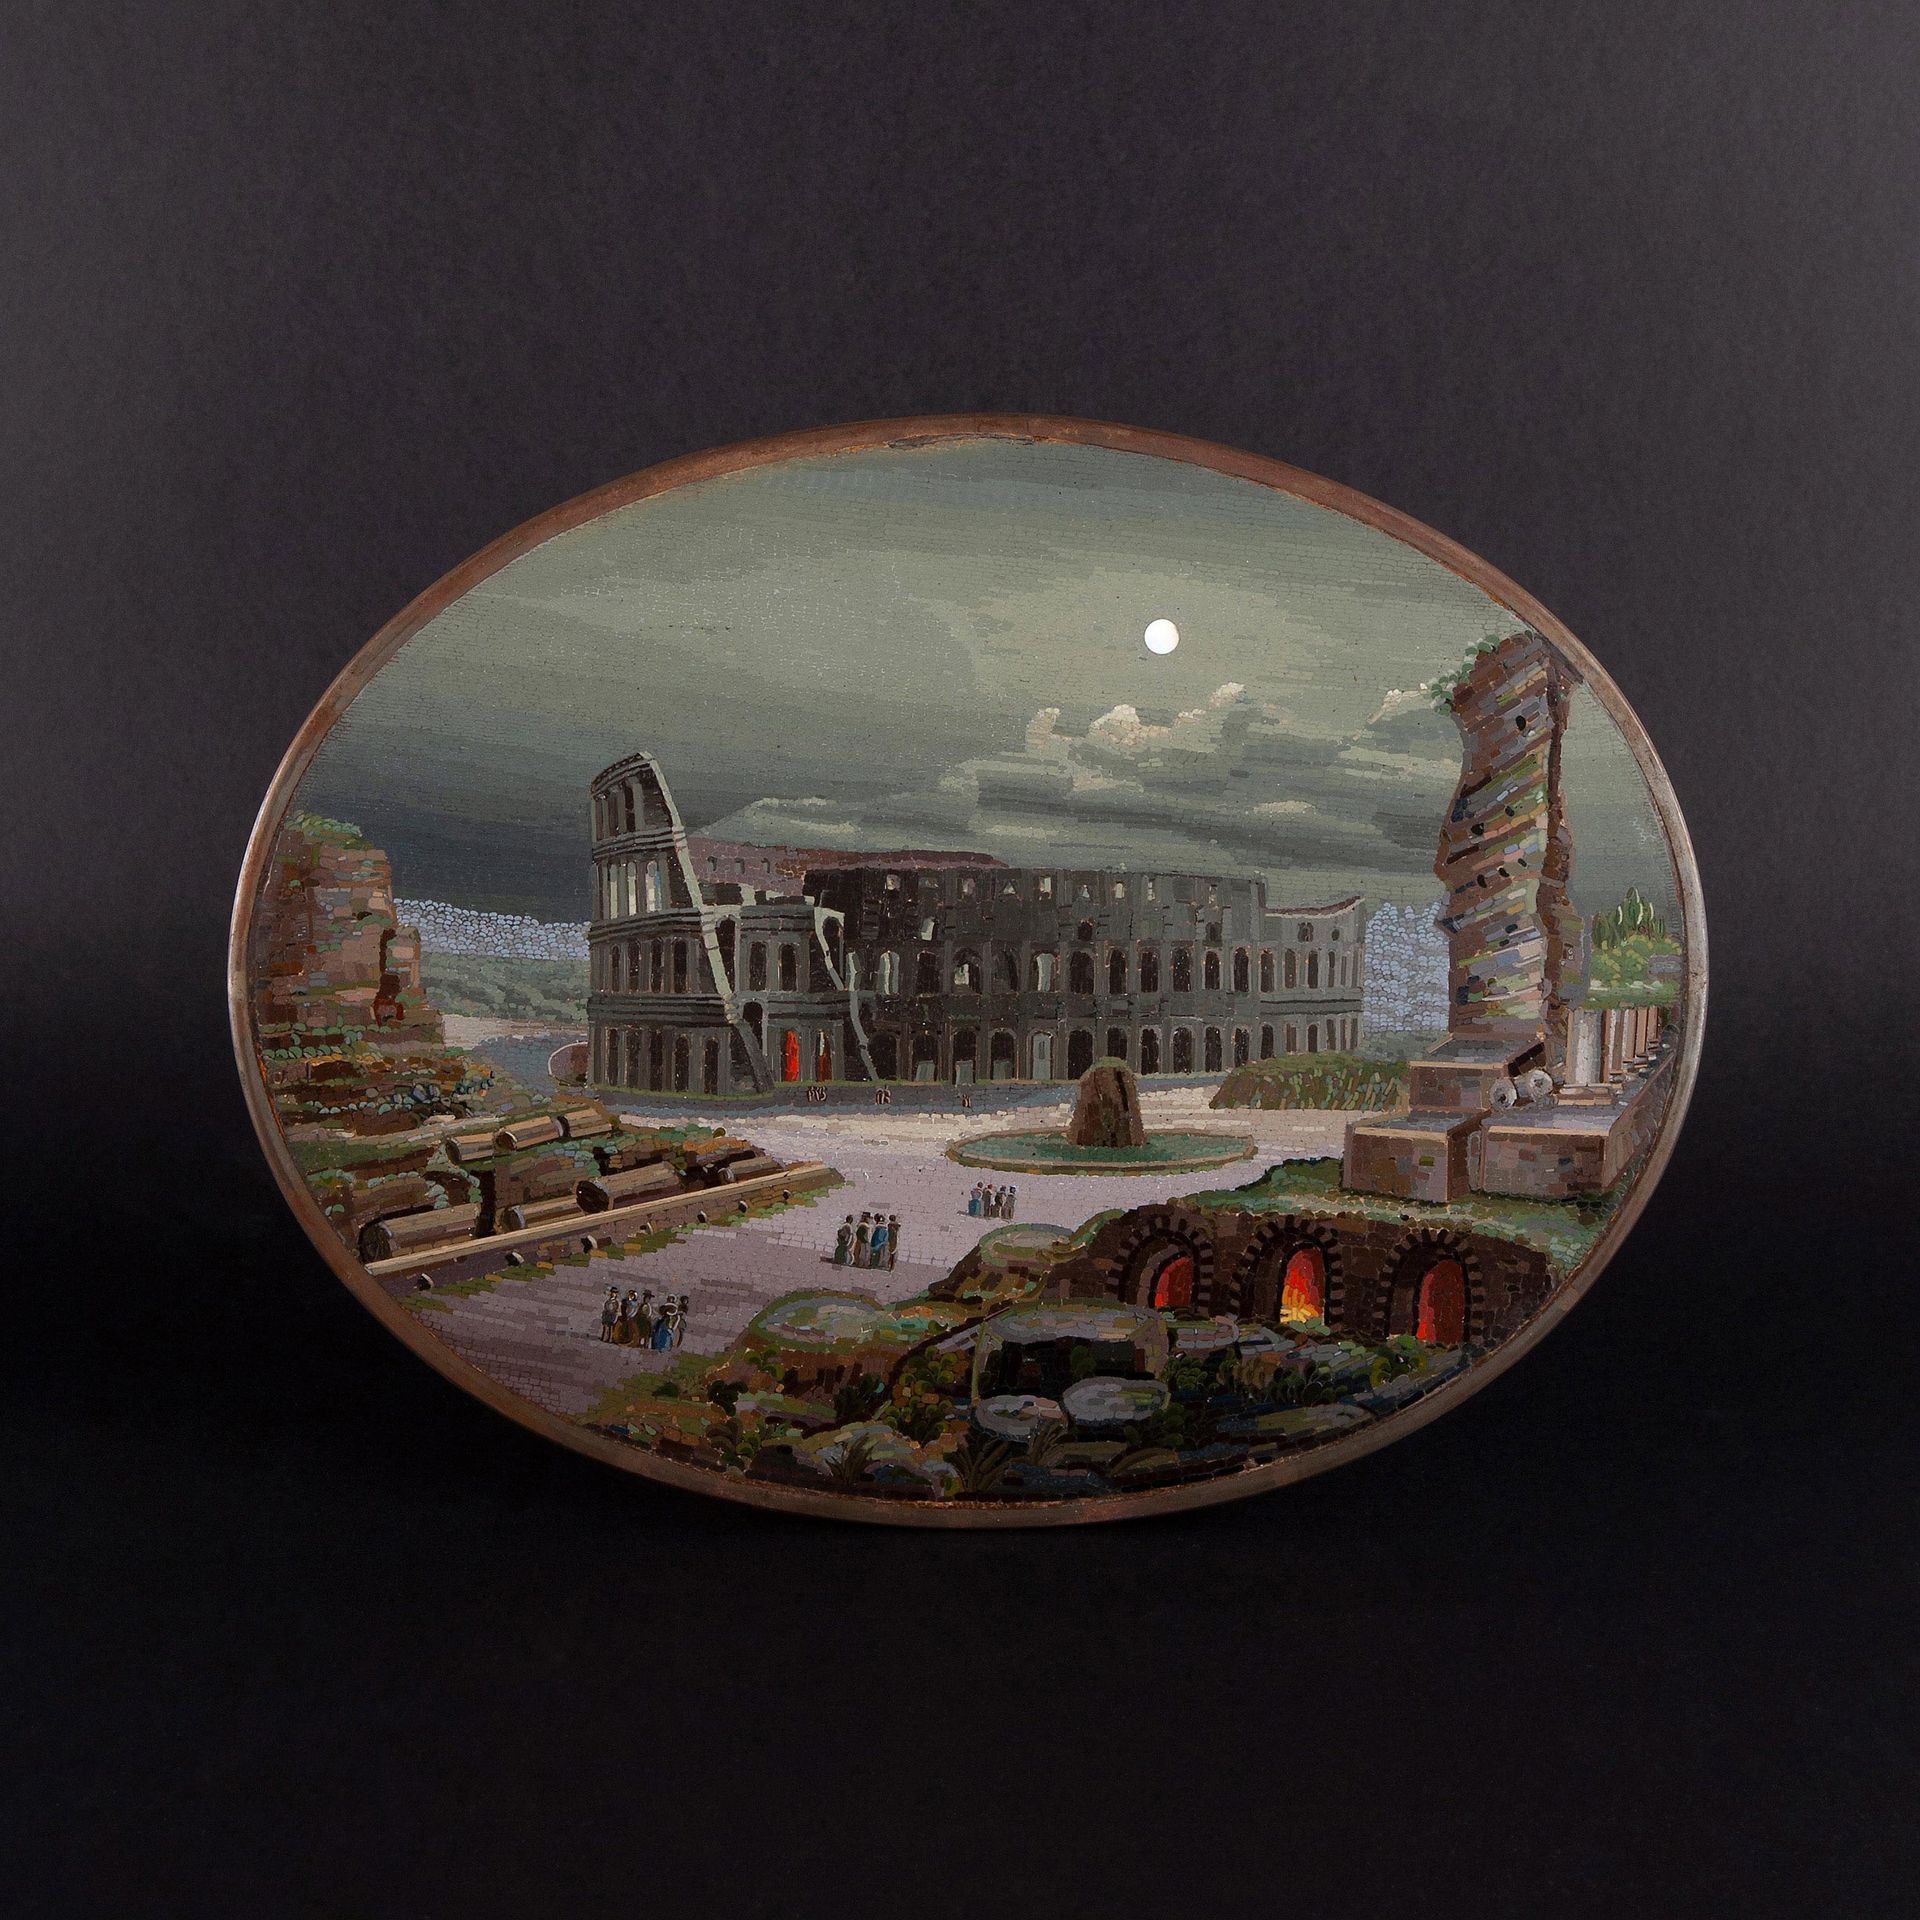 Rare oval micromosaic, nocturnal view of Colosseum Raro micromosaico ovale, vist&hellip;